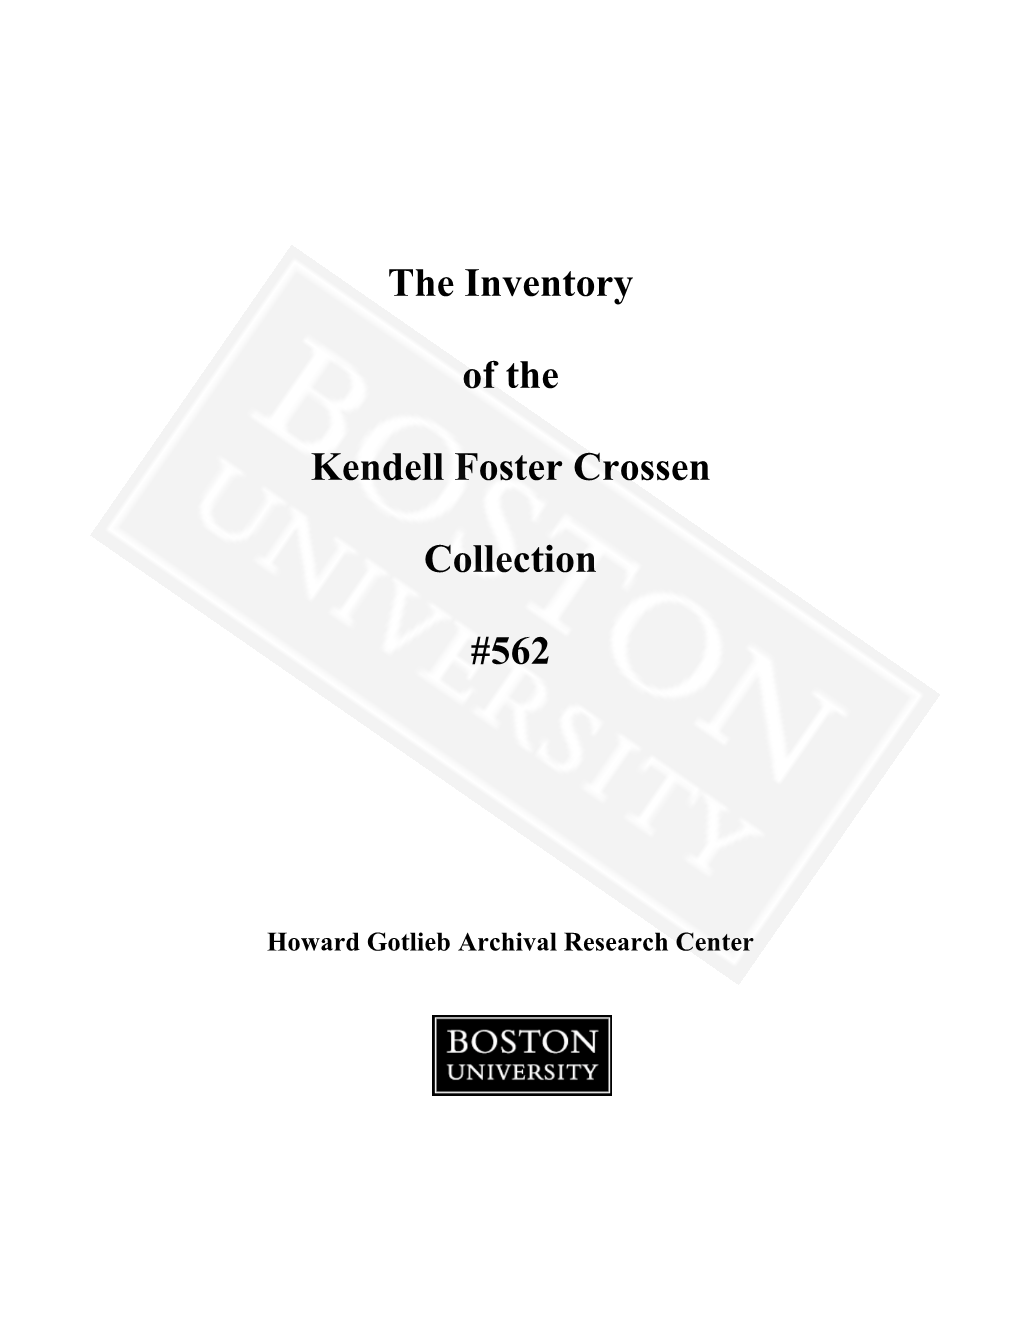 The Inventory of the Kendell Foster Crossen Collection #562